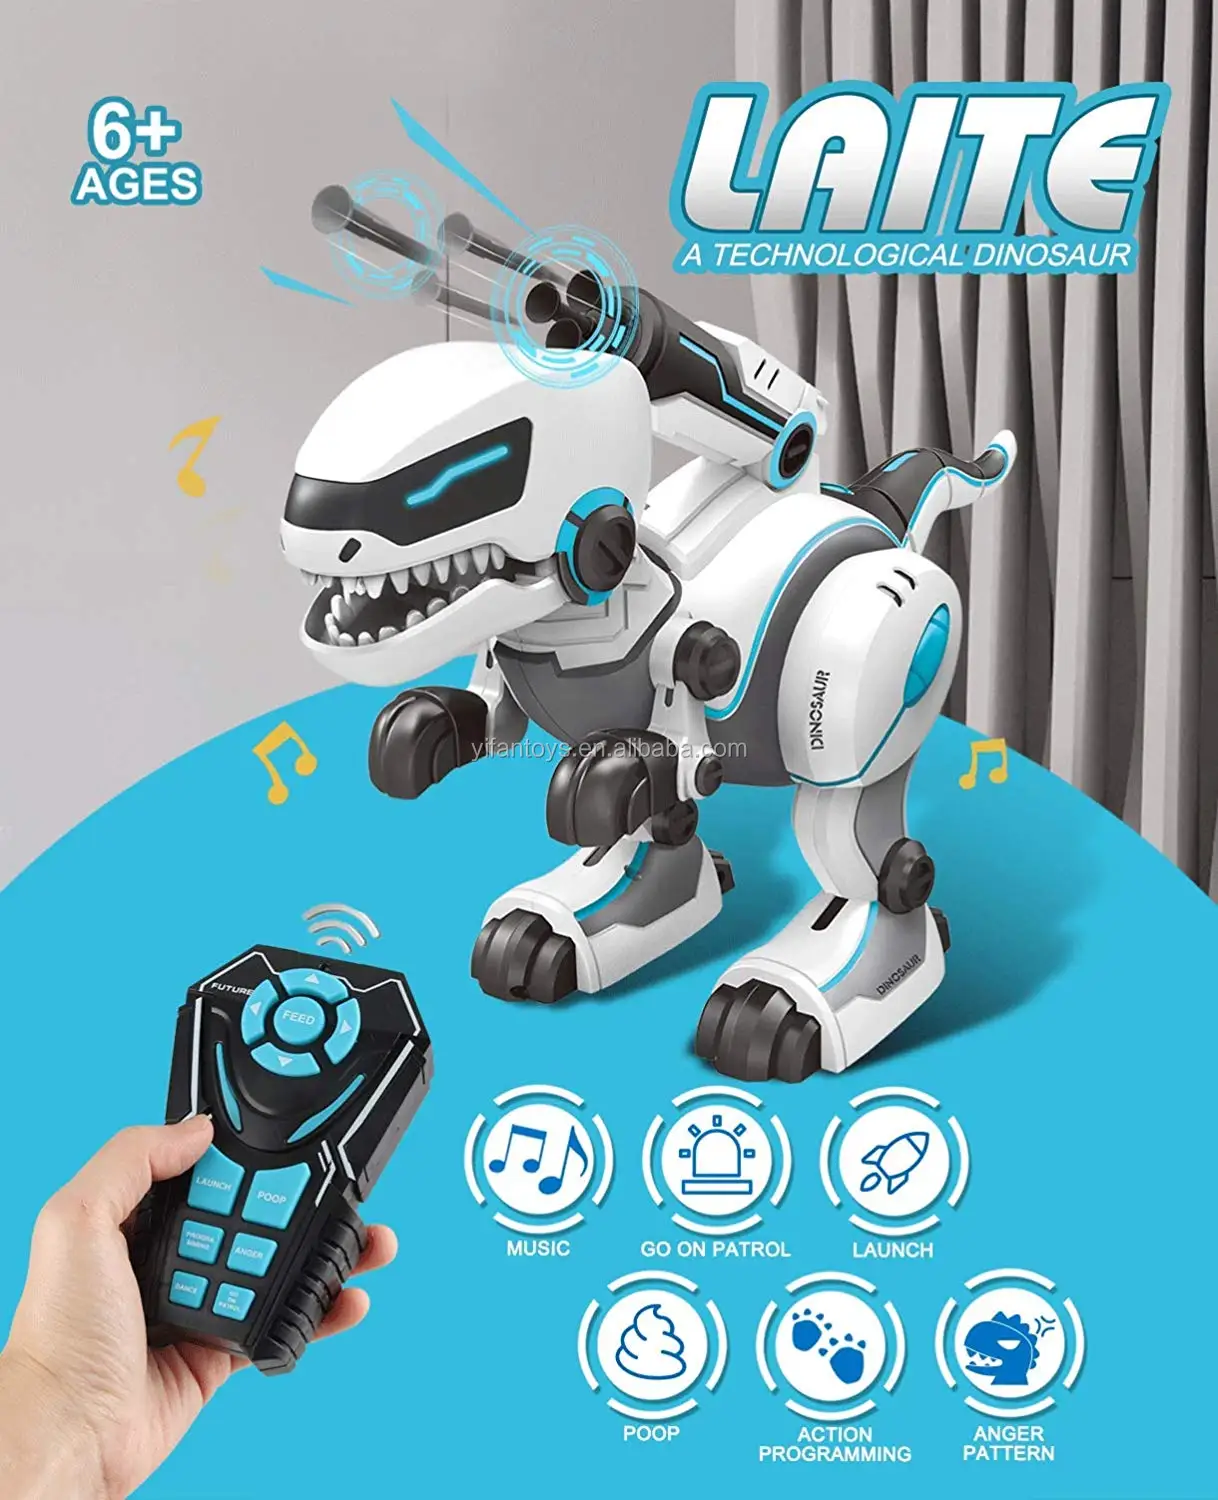 Details about   RC Dinosaur Robot Toy Smart Programmable Interactive Walk Sing Dance Kids Gift 